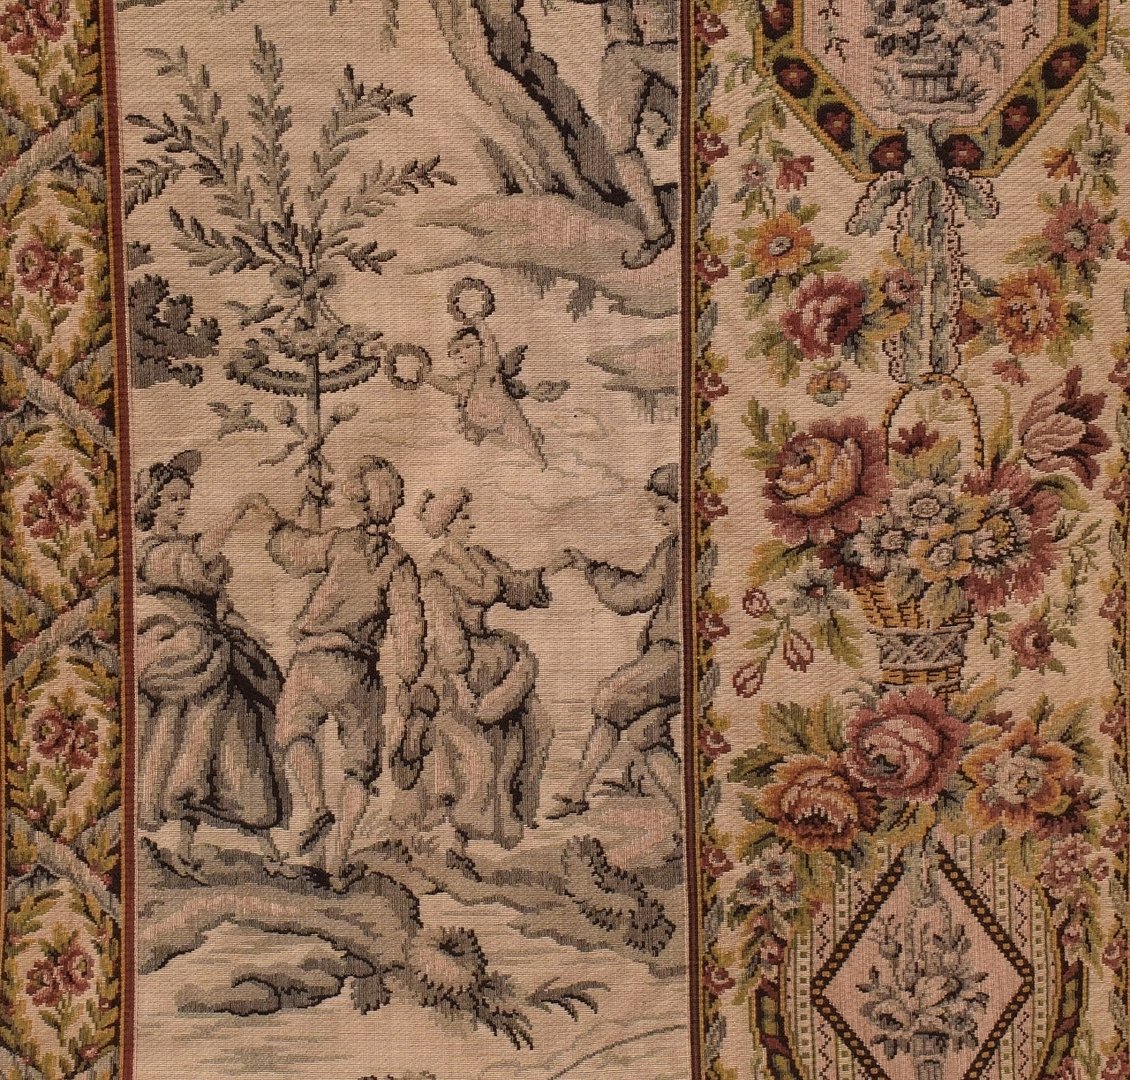 B921 - Divine Antique French Long Tapestry Chateau Portiere / Curtain / Panel, 19th C